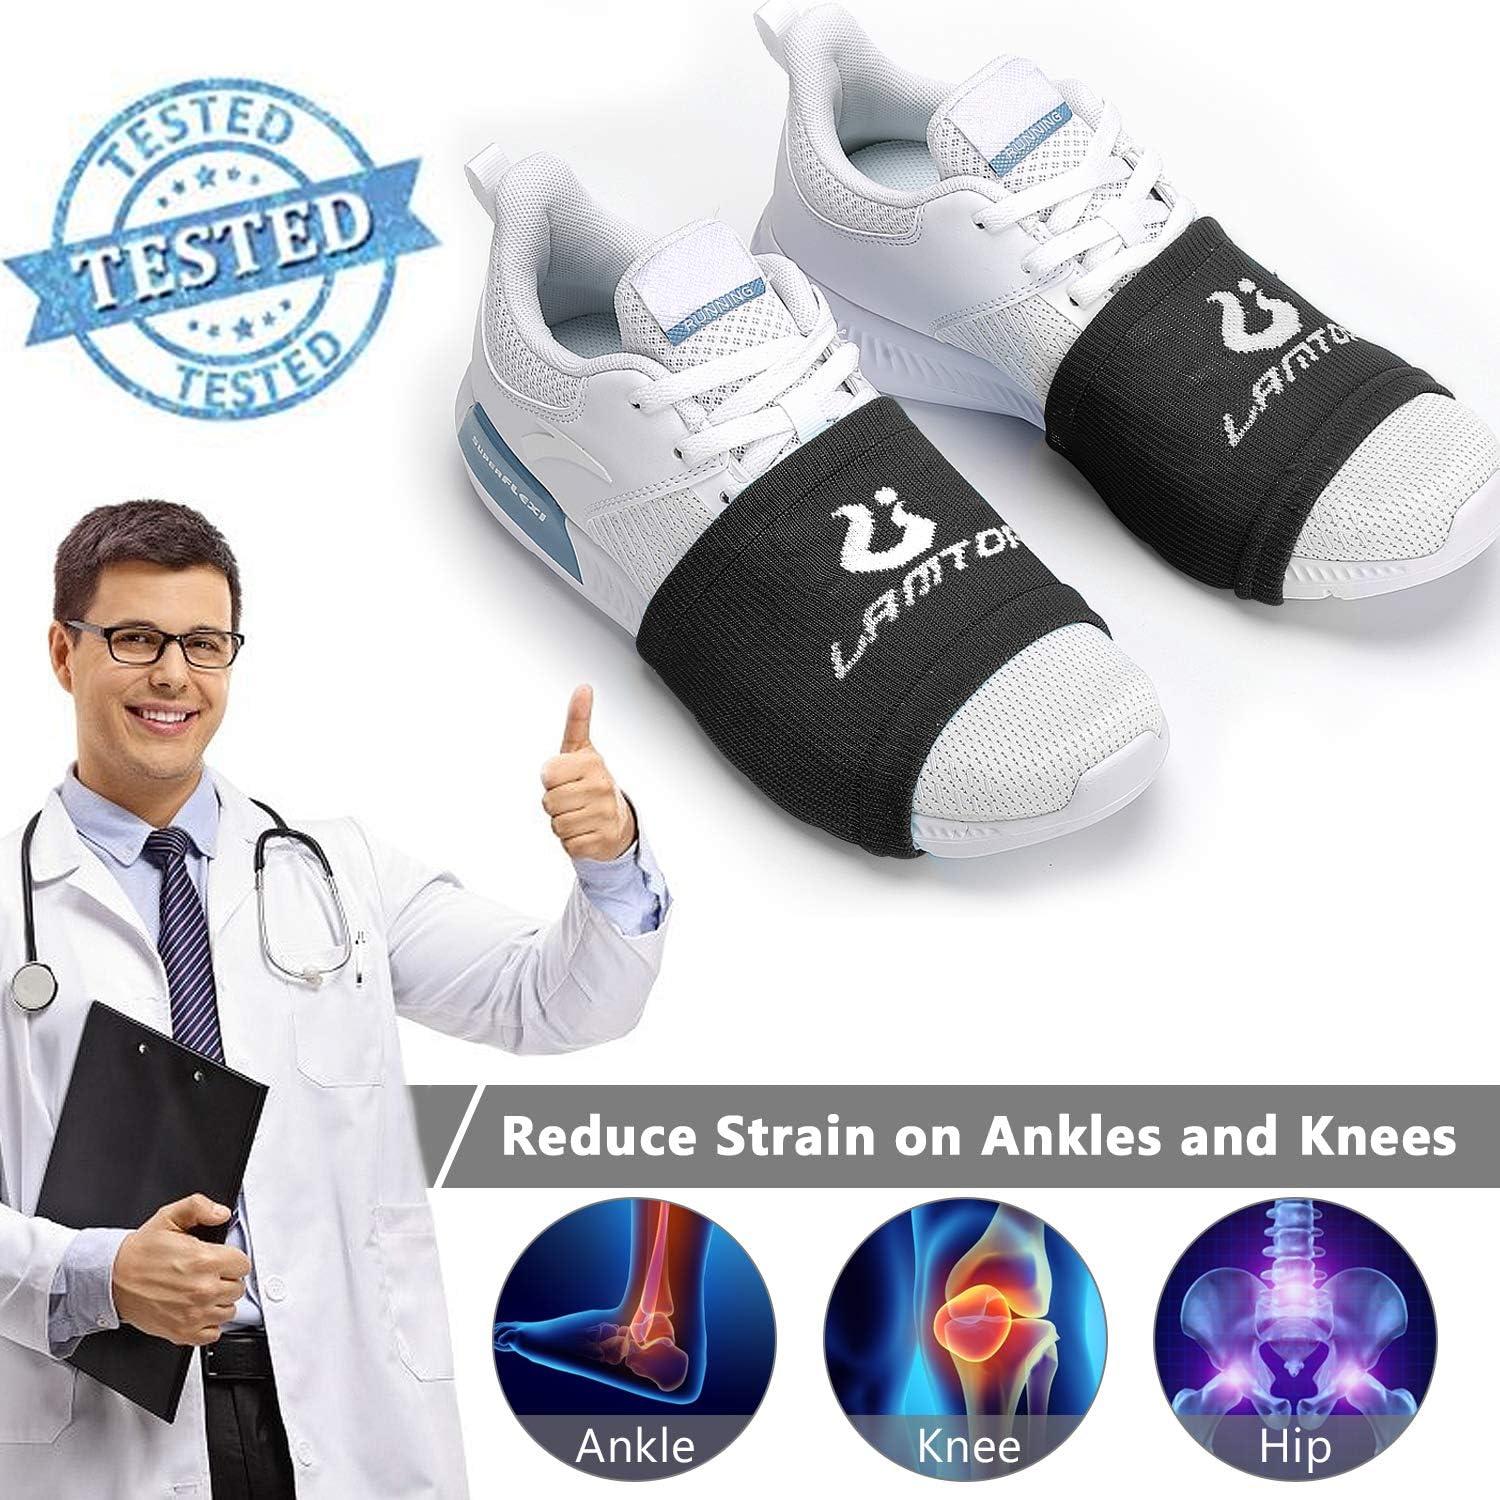 4 Pairs Dance Socks Shoe Socks on Smooth Floors Over Sneakers,Smooth Pivots  and Turns to Dance on Wood Floors Protect Knees 4 Pairs(black)